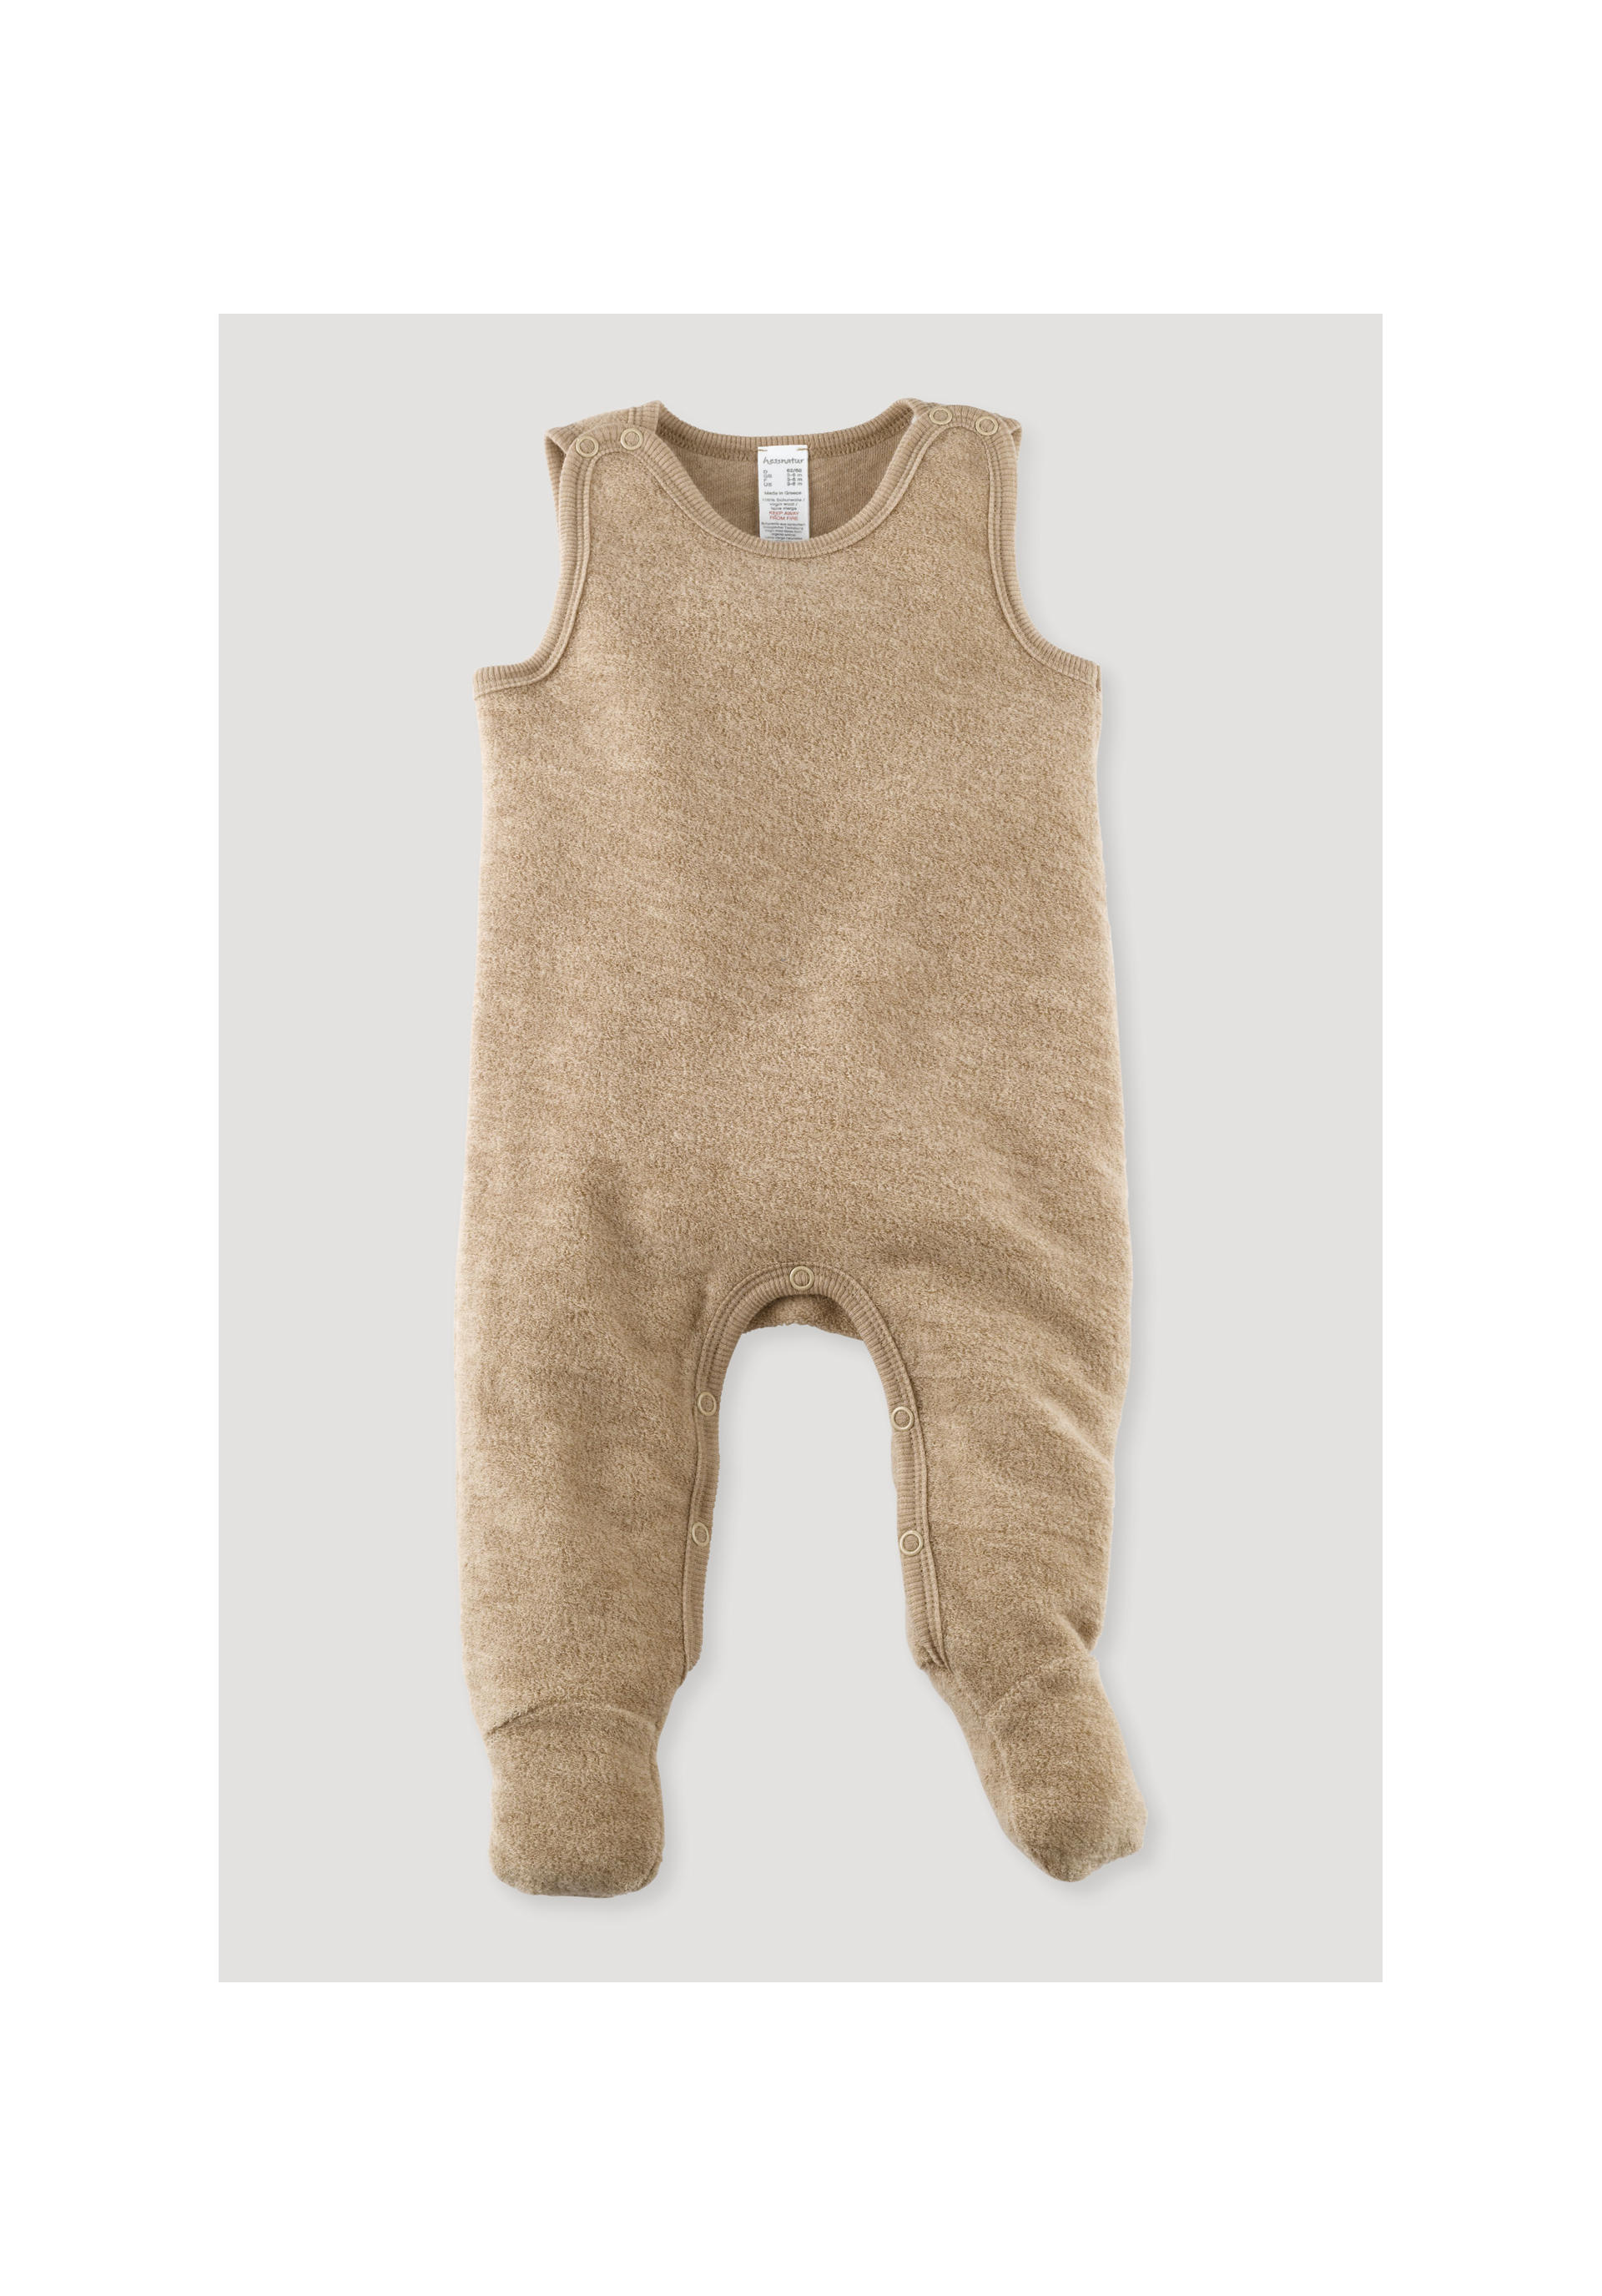 Zara baby-romper discount 83% Beige 62                  EU KIDS FASHION Baby Jumpsuits & Dungarees Casual 